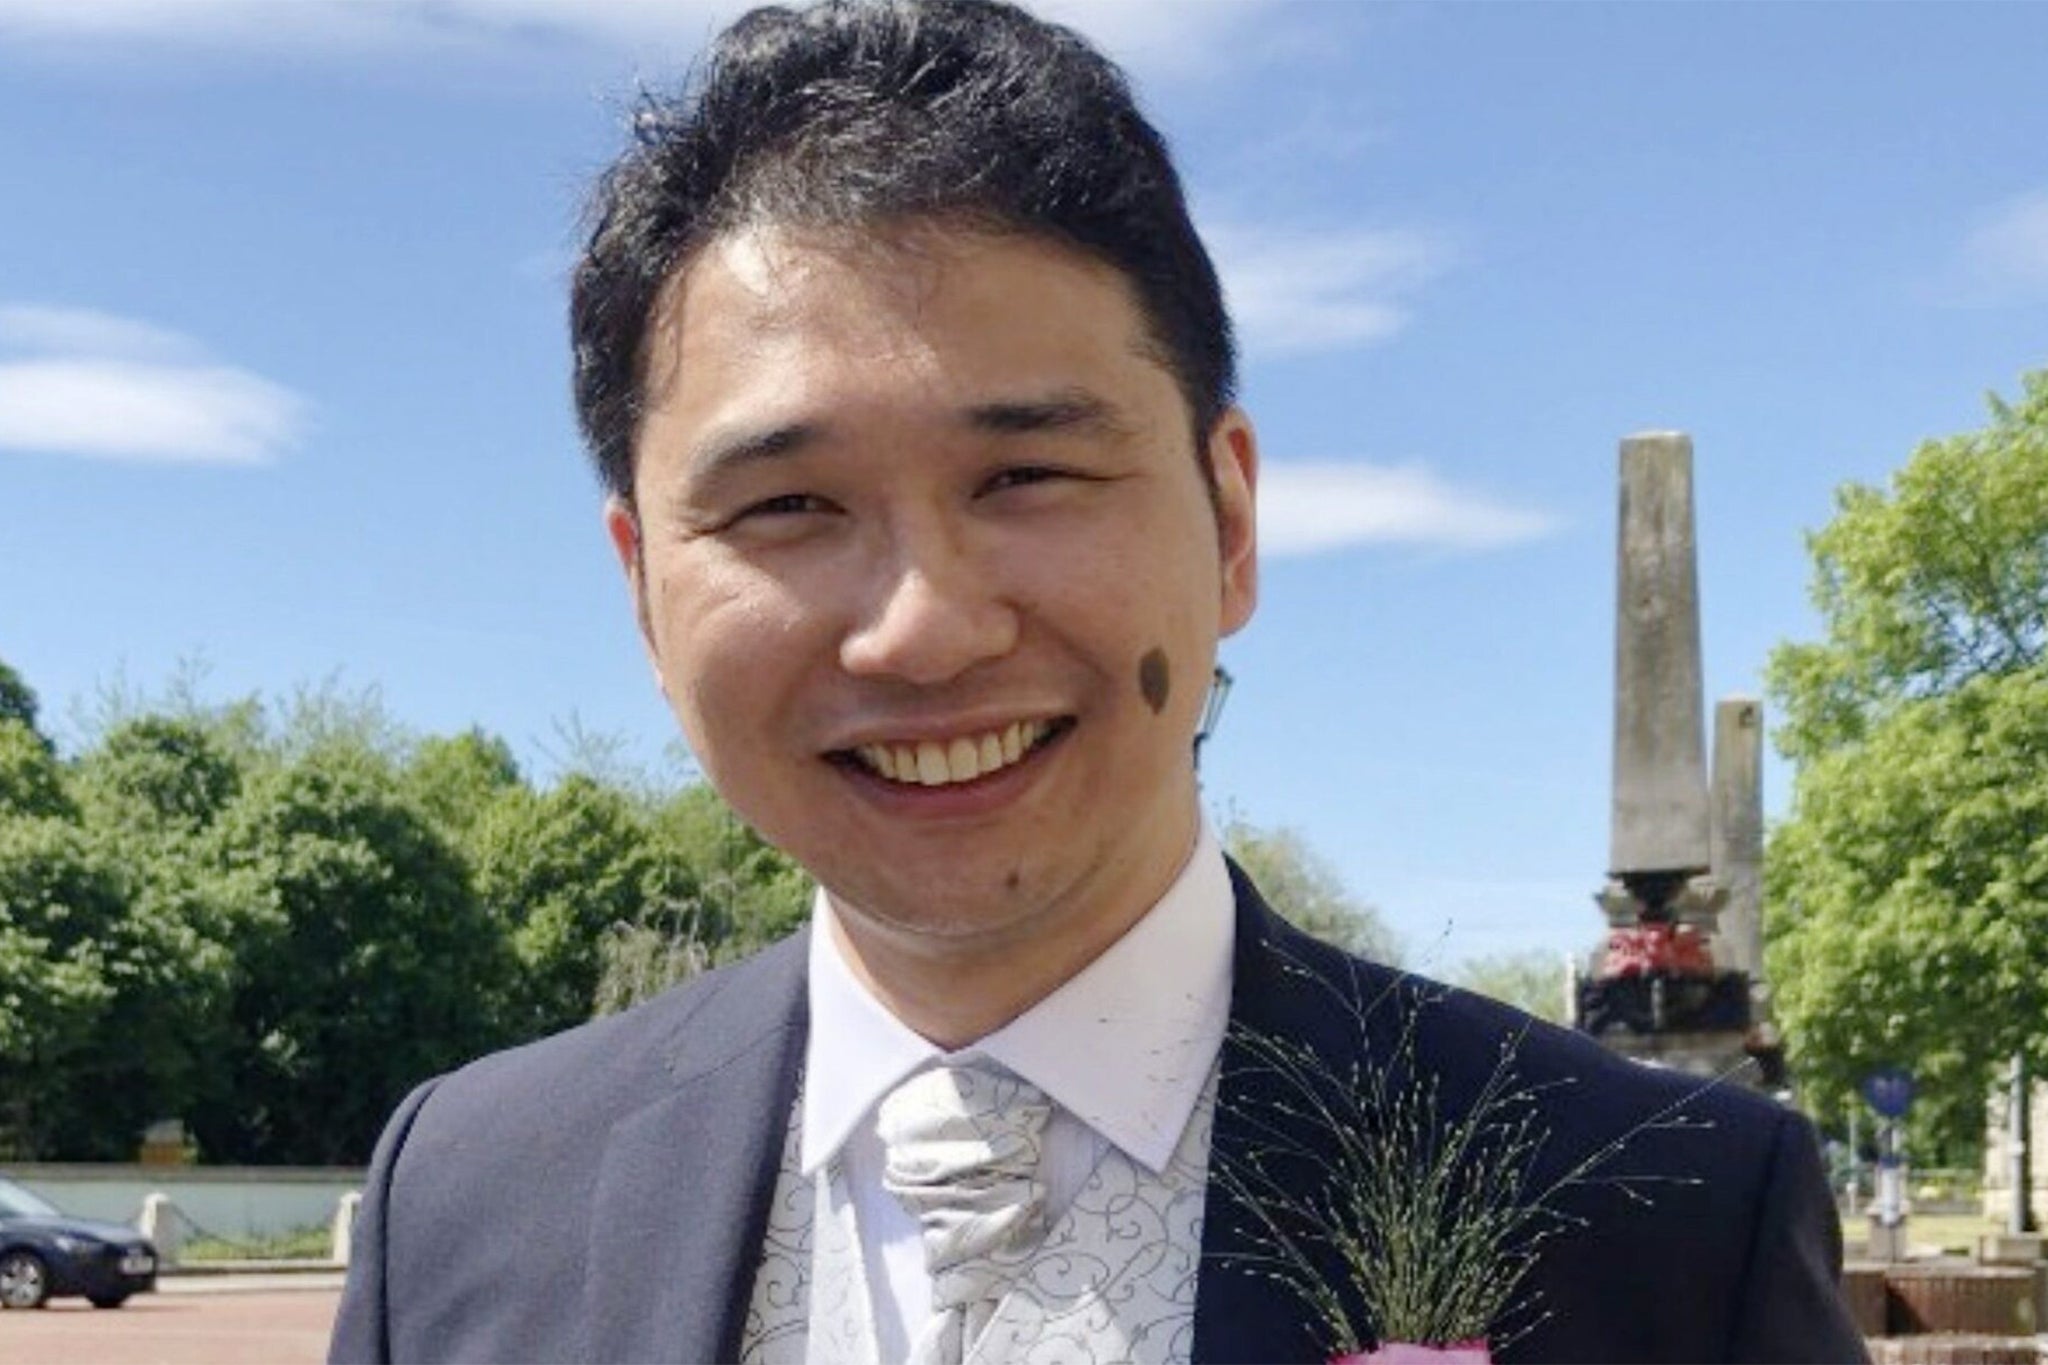 Renowned British surgeon Kar Hao Teoh was fatally shot in front of his wife and two-year-old son in Cape Town